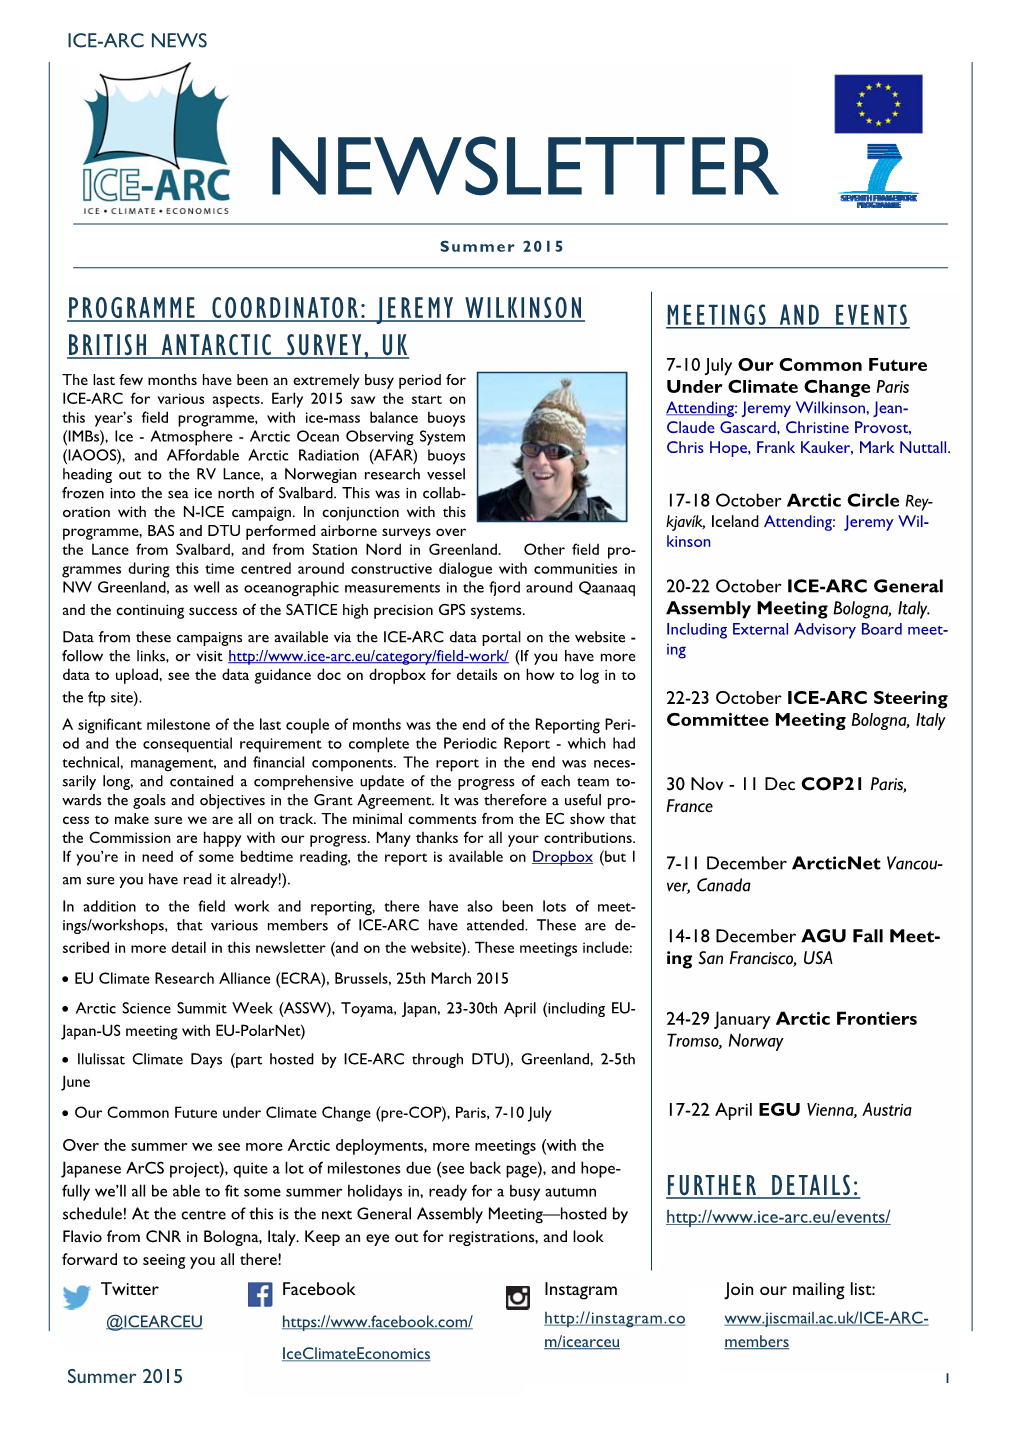 Pages from ICE-ARC Internal Newsletter Summer 2015